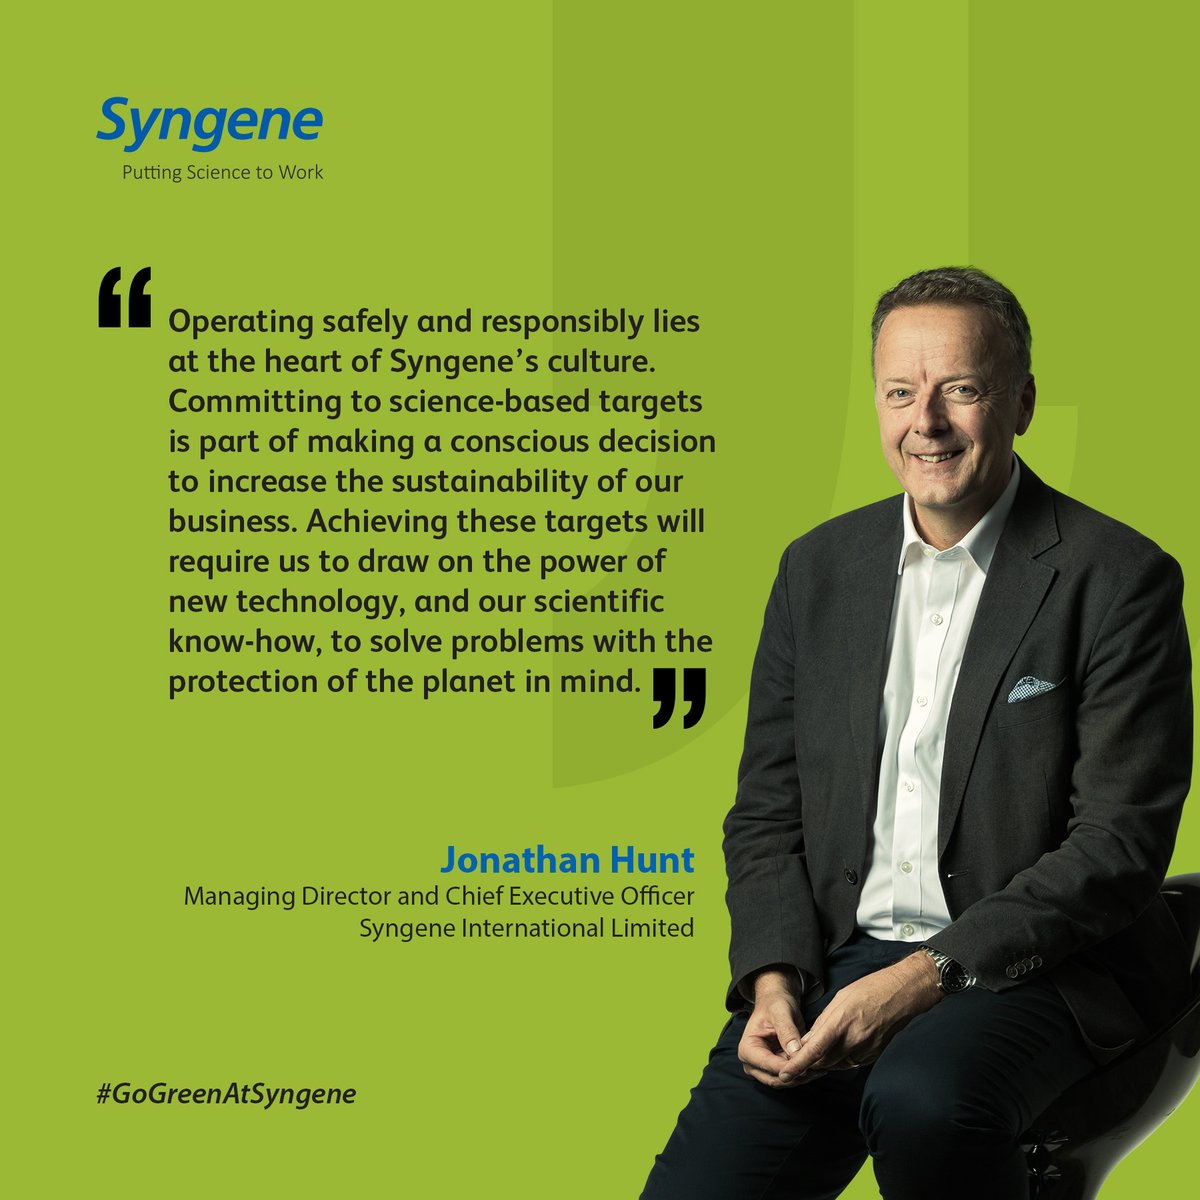 April 22, Earth Day, reminds us to unite for a greener planet.
 #Syngene has taken an important step forward in its contribution towards protecting the planet.
#GoGreenAtSyngene #LifeAtSyngene #EarthDay2024

1/6